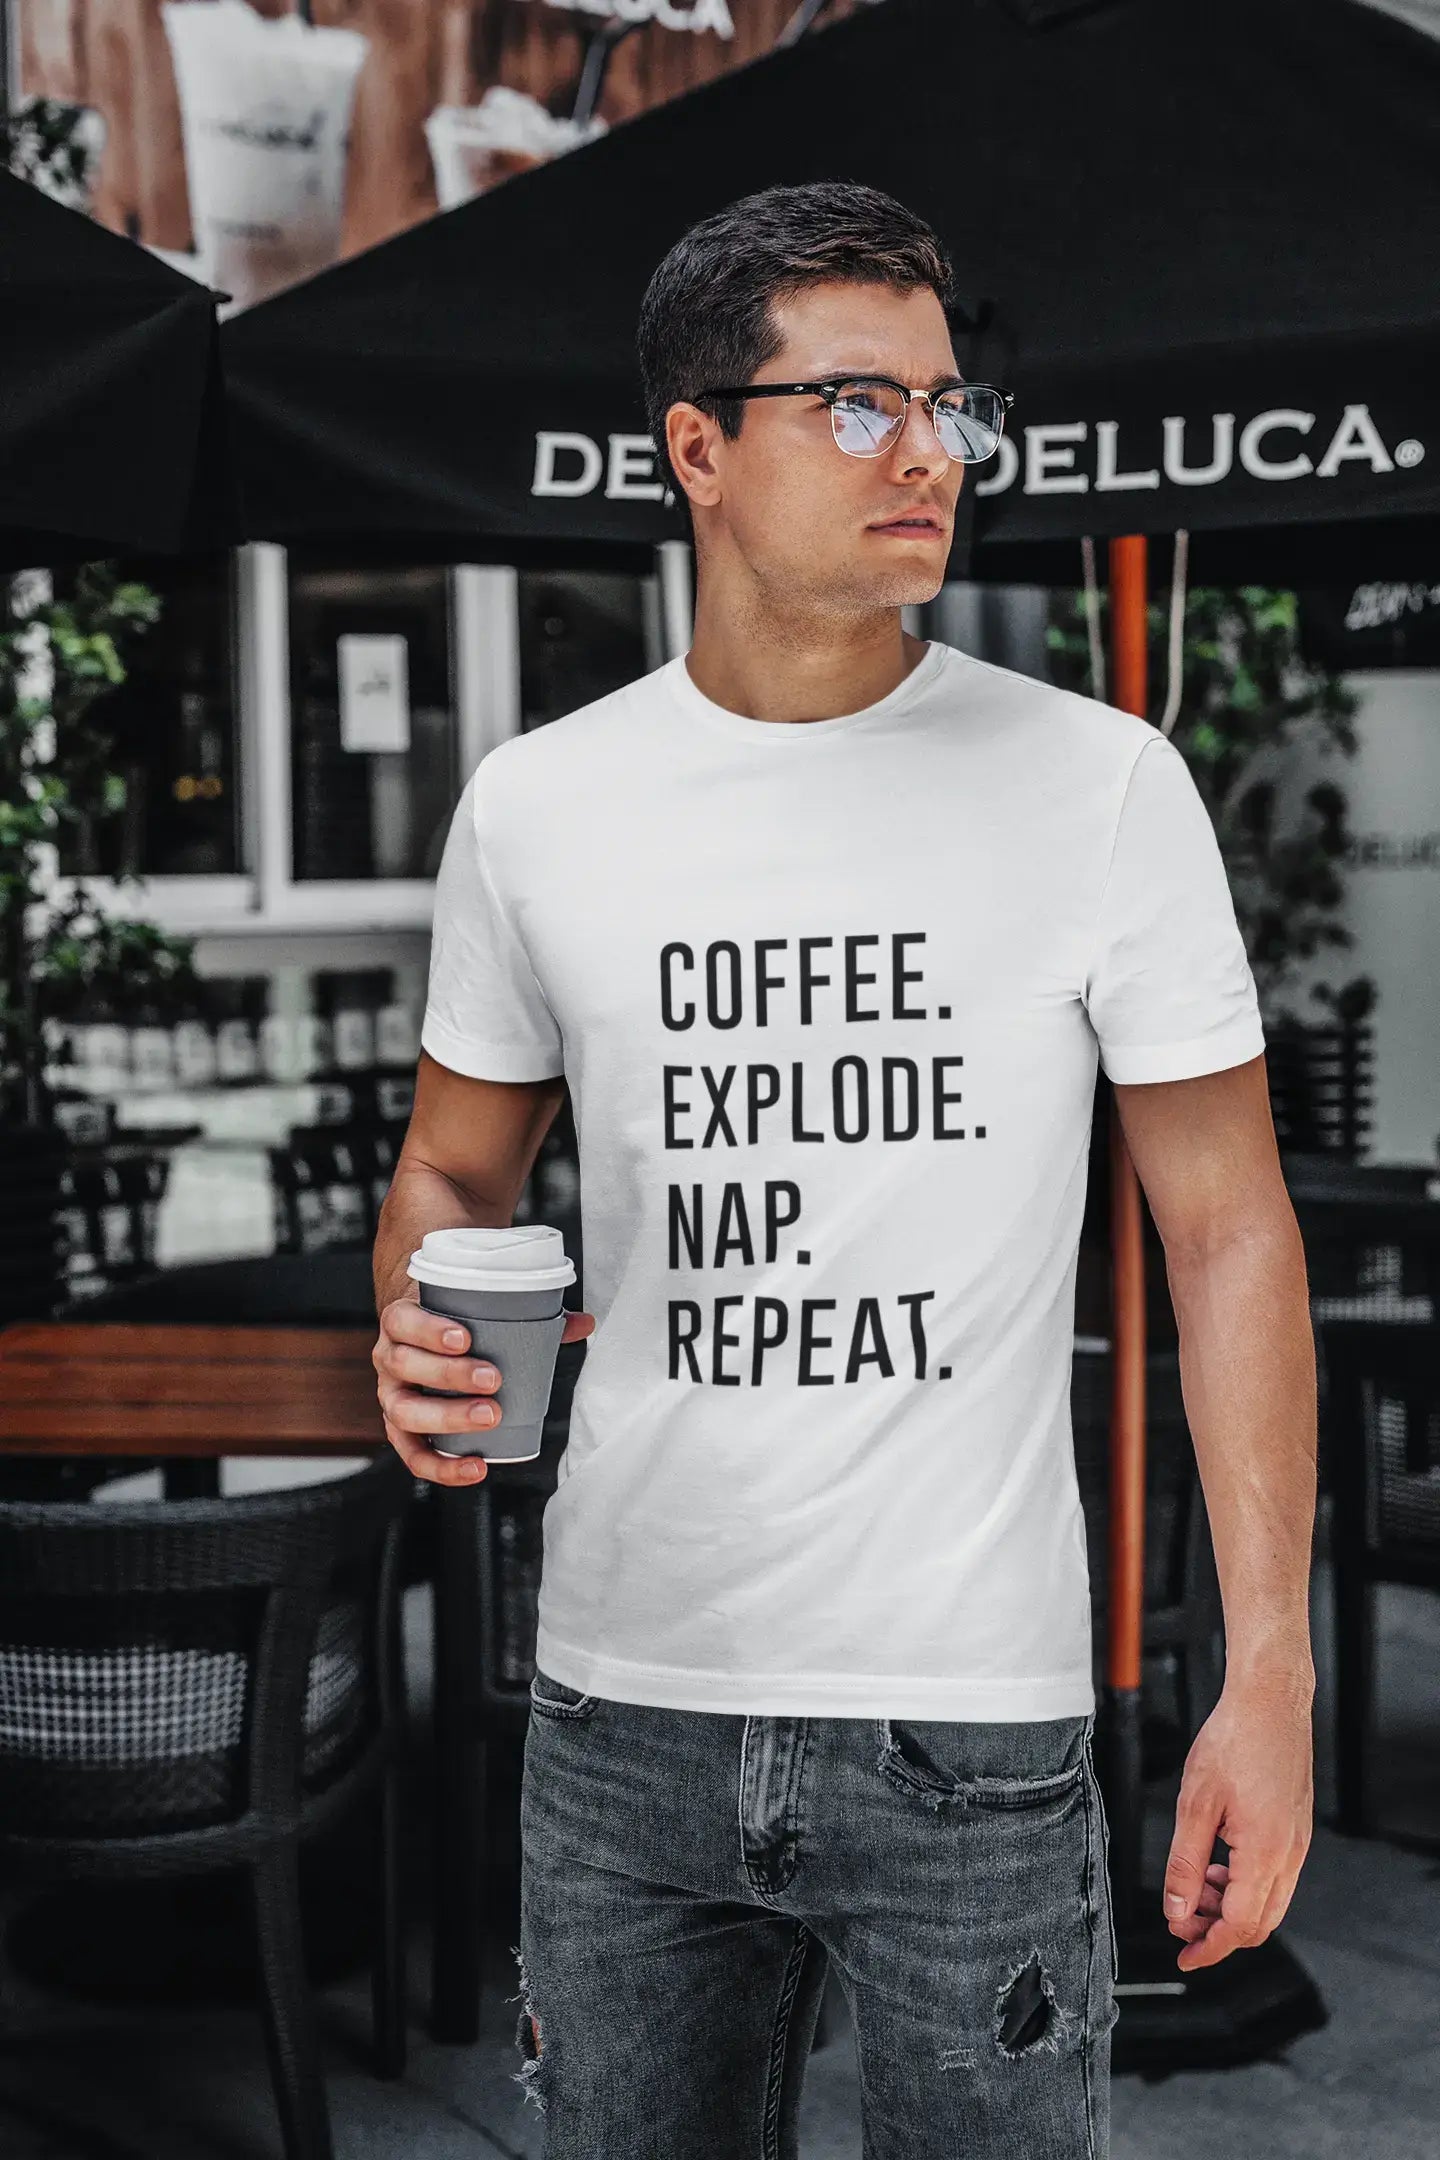 COFFEE EXPLODE NAP REPEAT Men's Short Sleeve Round Neck T-shirt 00058